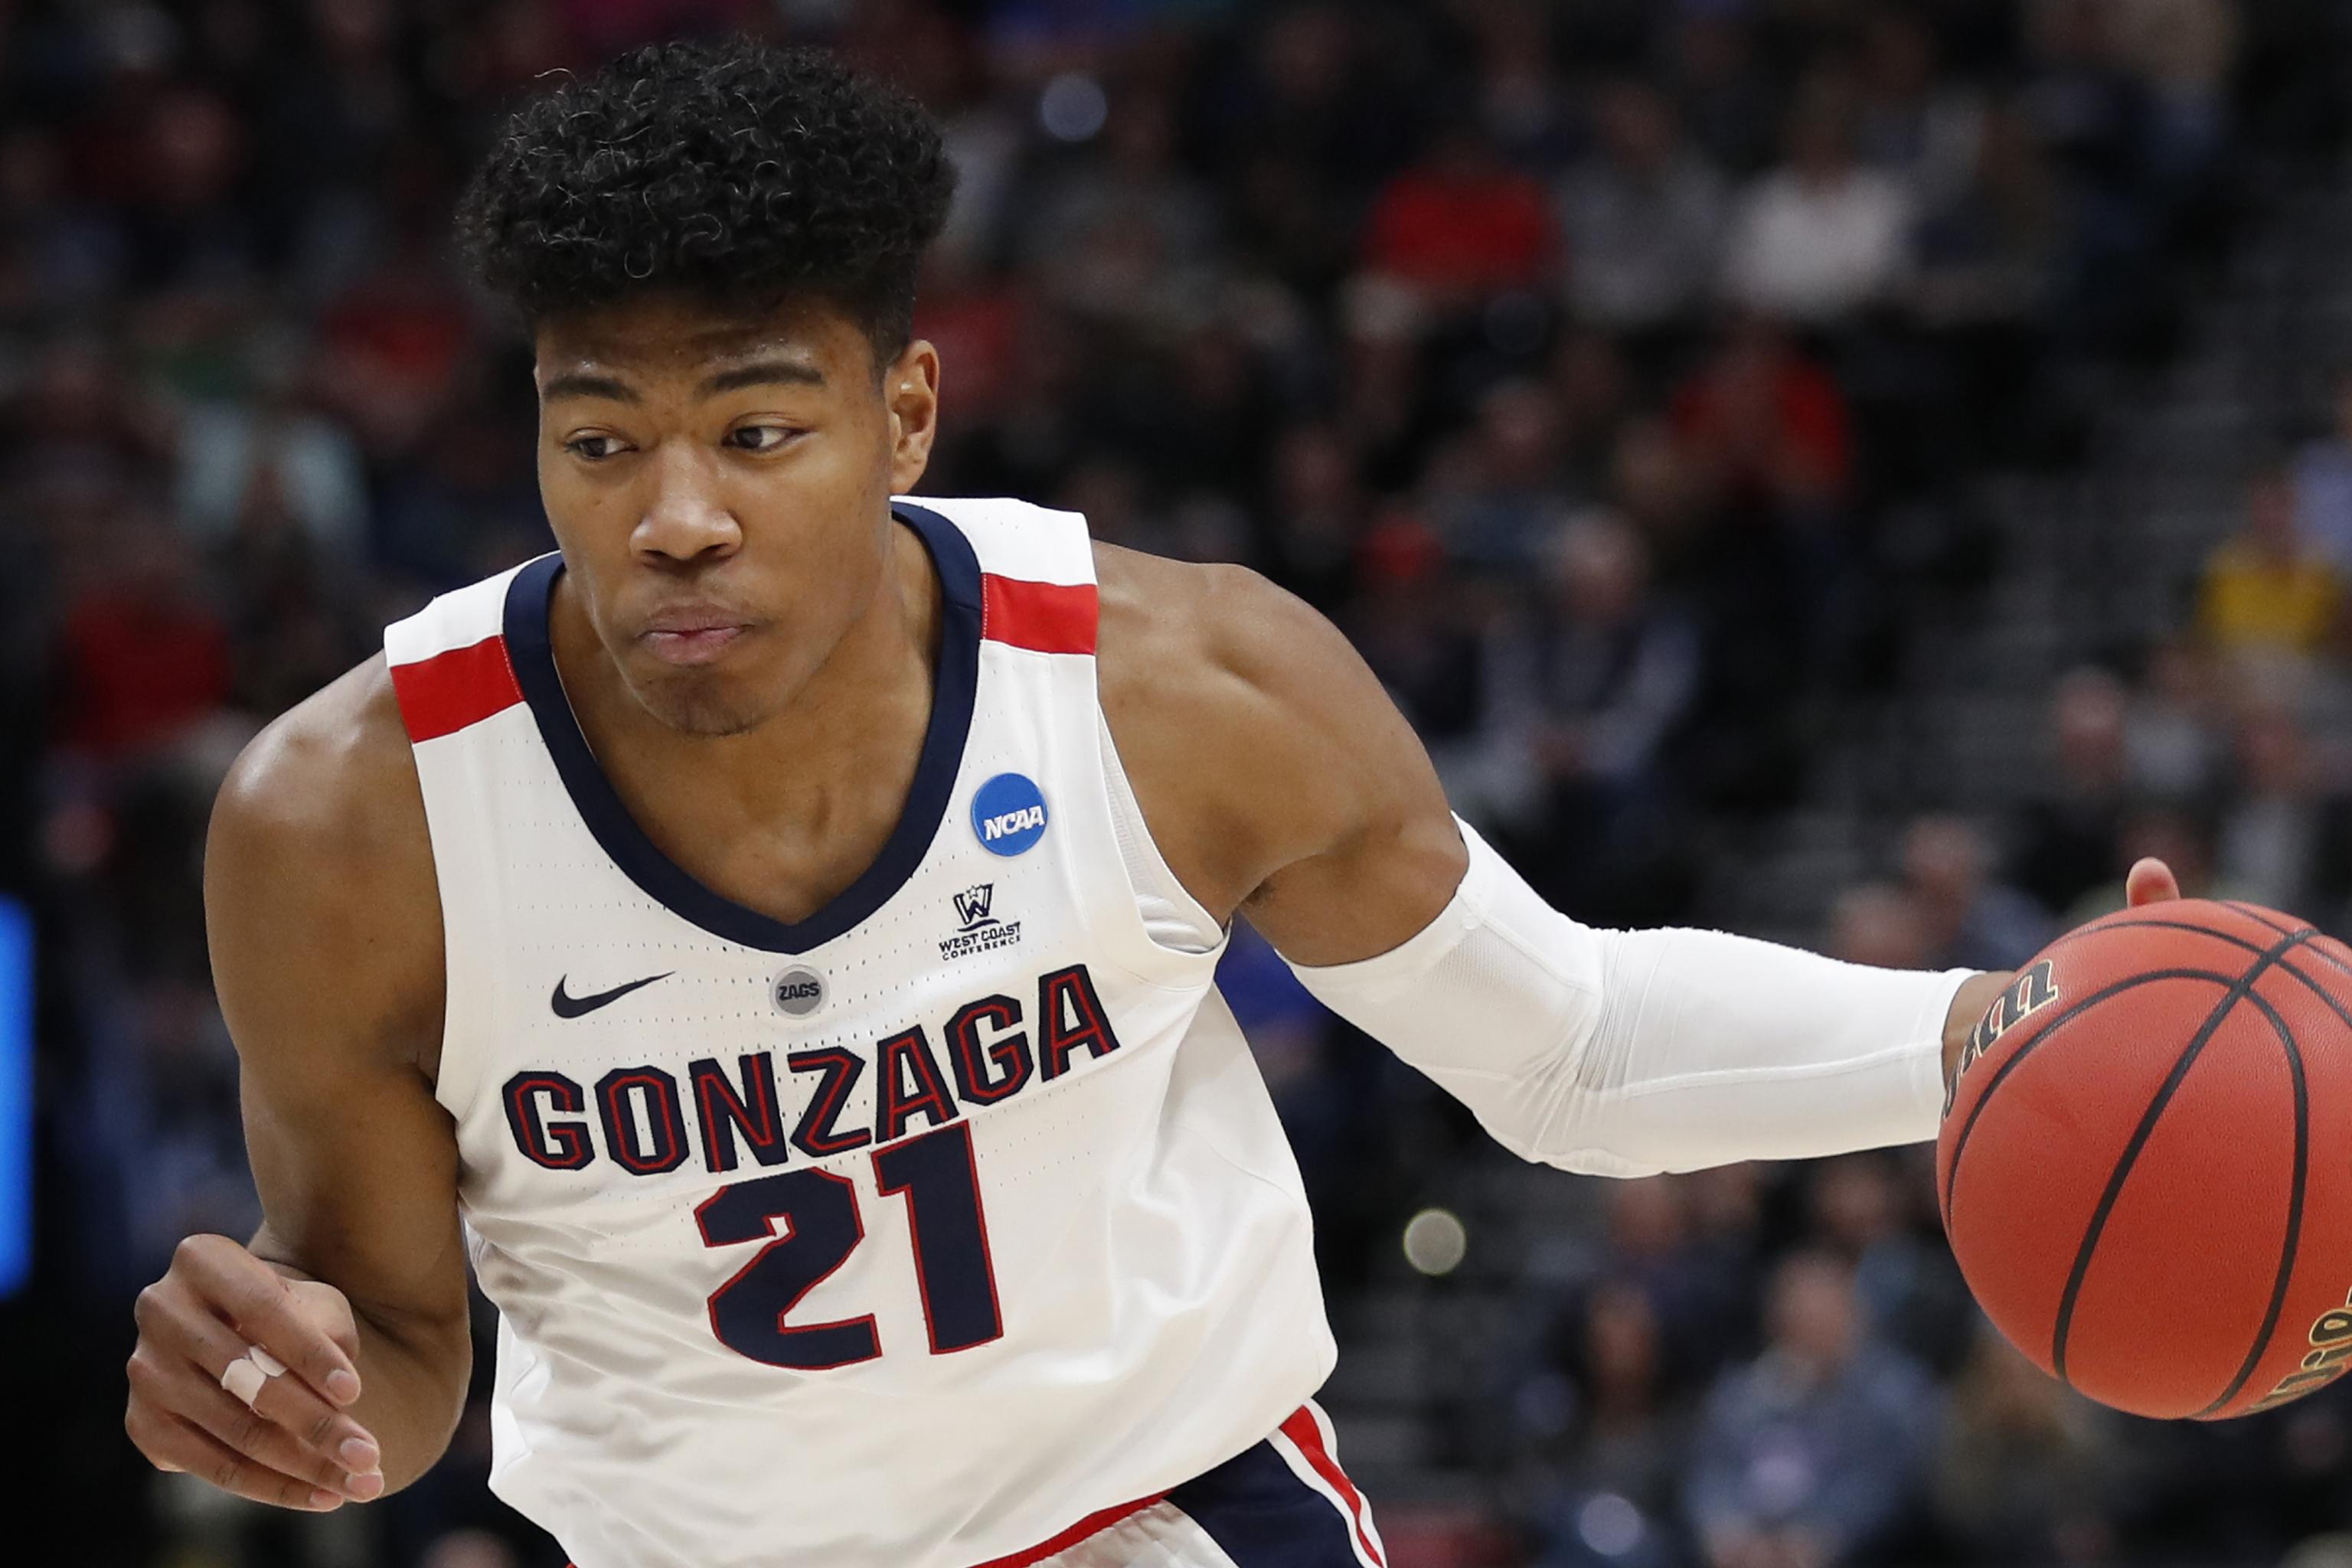 Rui Hachimura S 2019 Nba Draft Scouting Report Analysis Of Wizards Pick Bleacher Report Latest News Videos And Highlights